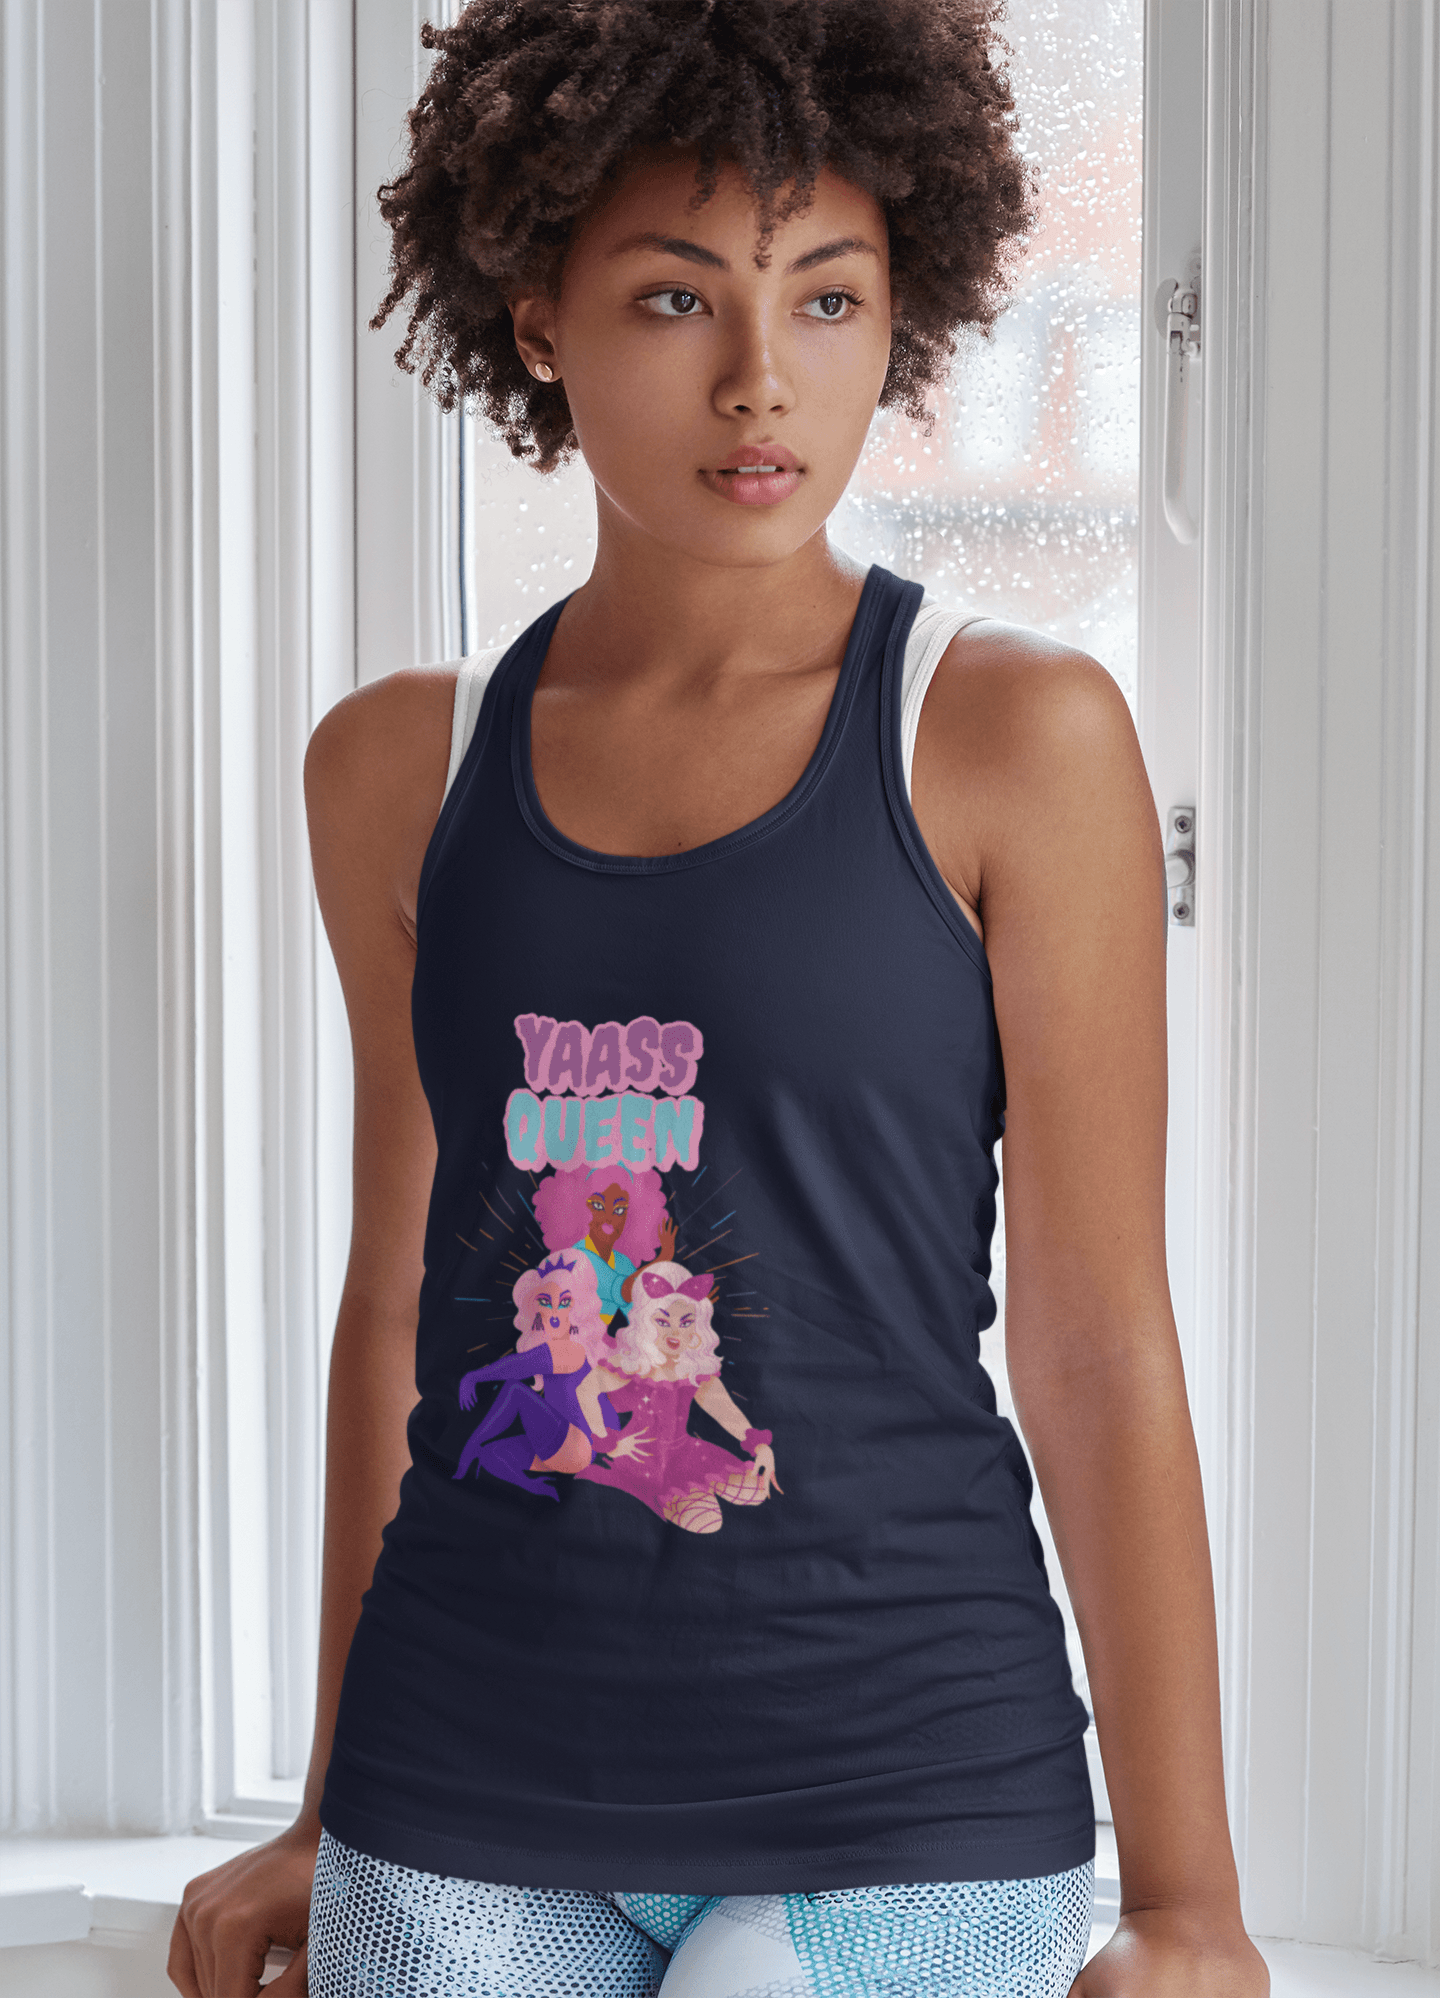 Yass Queen Tank Top - The Accessorys Official